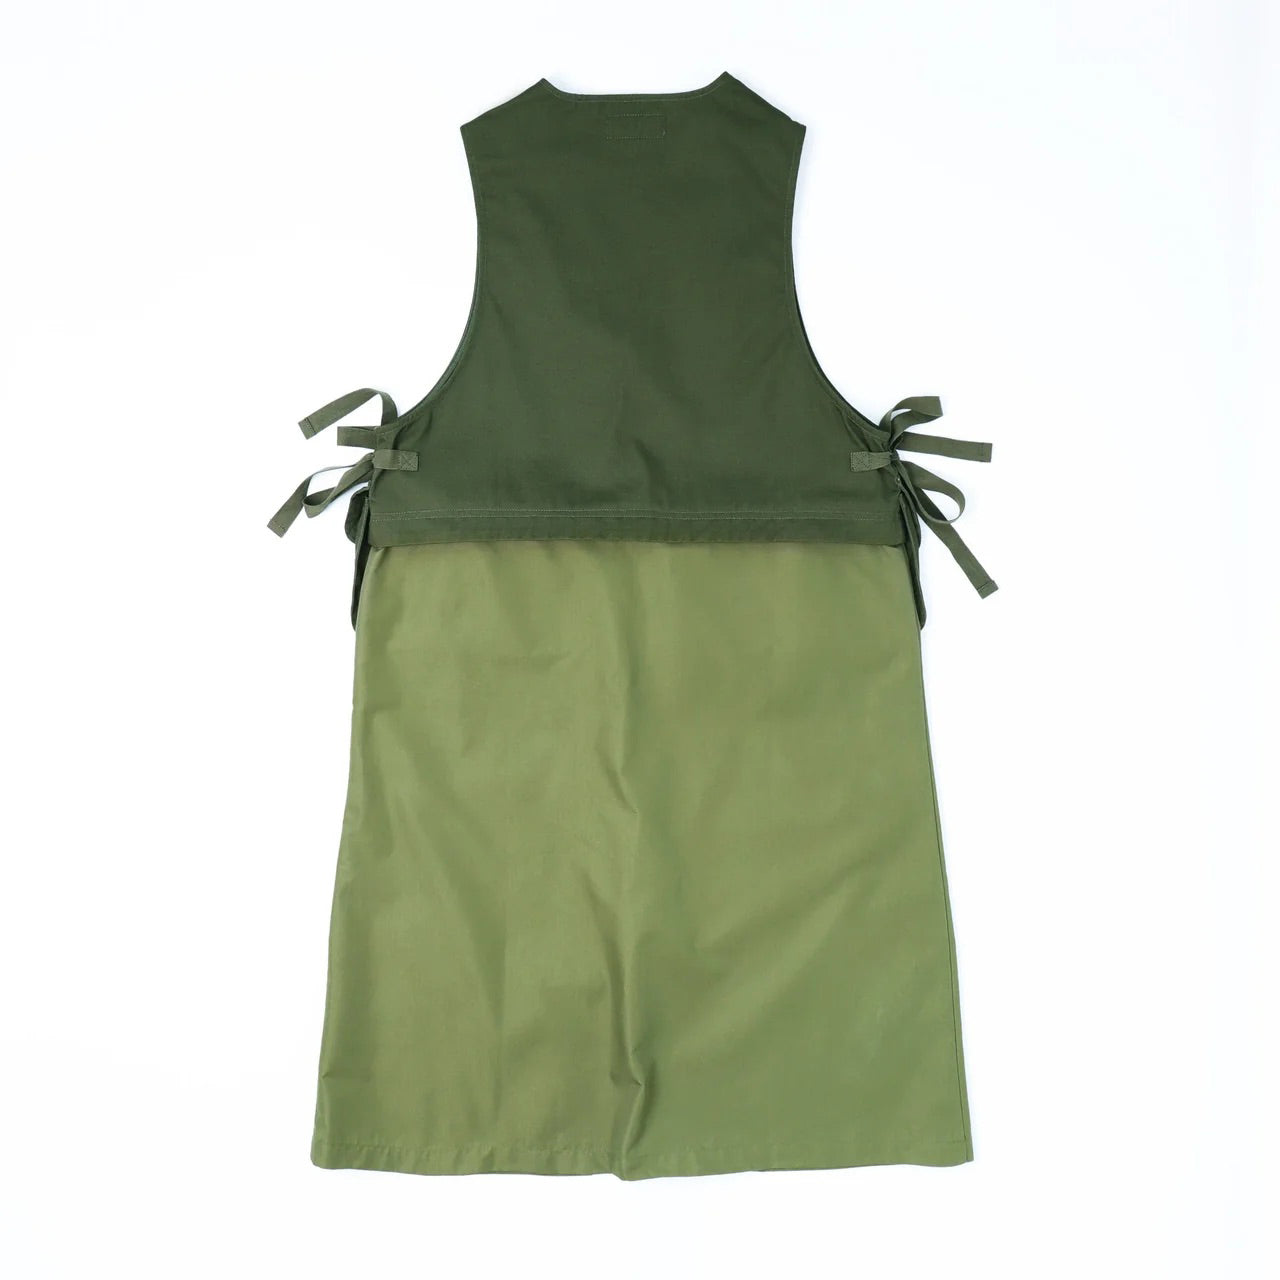 No:#616 | Name:FW23-MRS.WORKWARE FIELD ONE PIECE | Color:Green | Size:Free【WORKWARE】